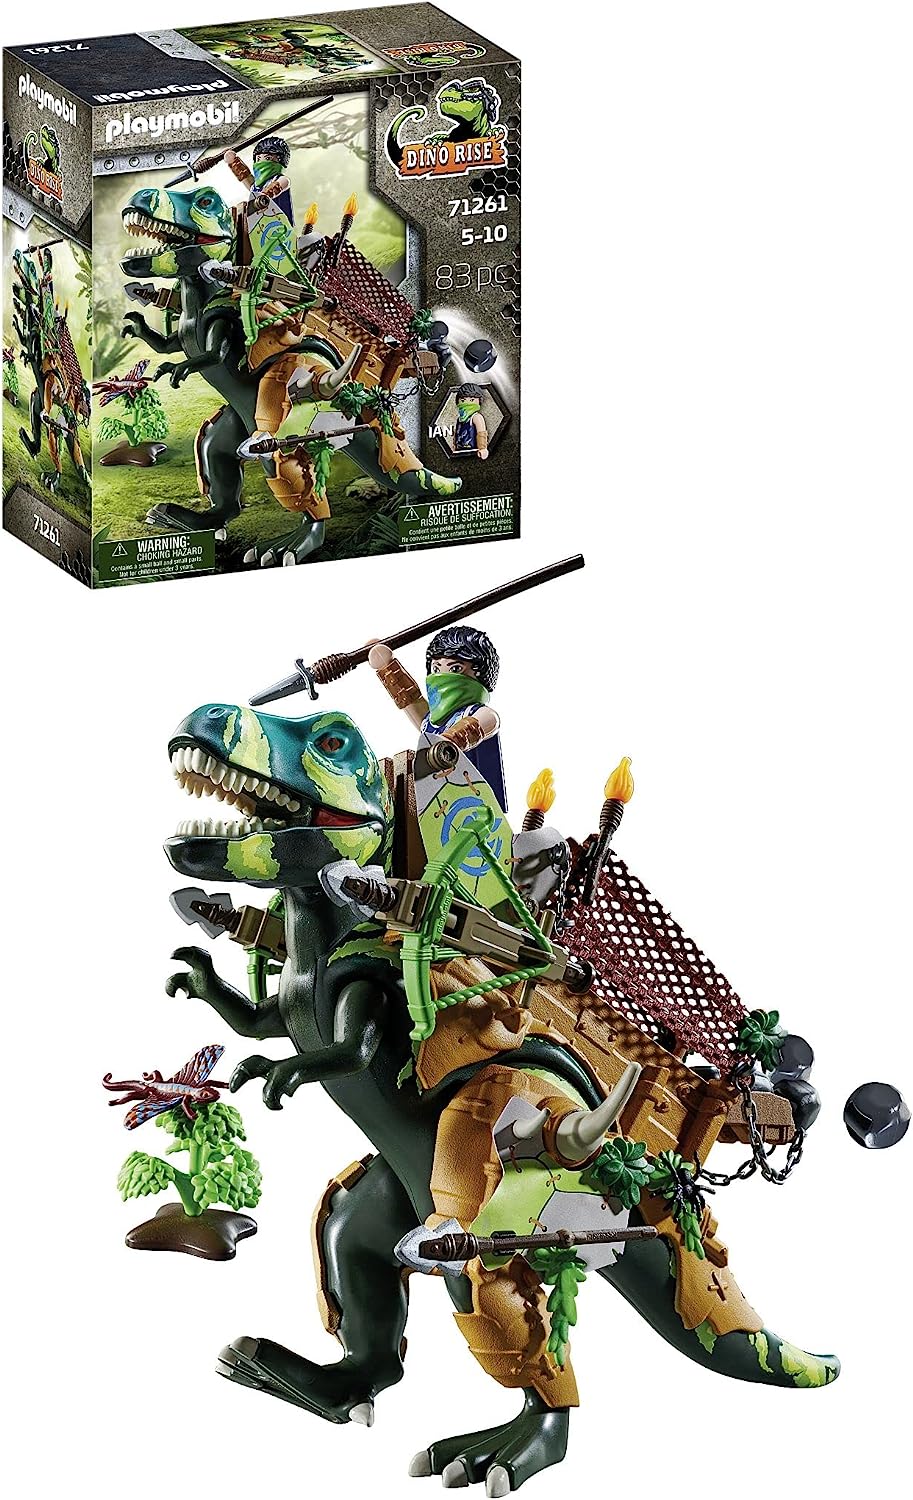 Playmobil Dino Rise 71261 T-Rex Dinosaur with Functional Armor, Toy for Children from 5 years